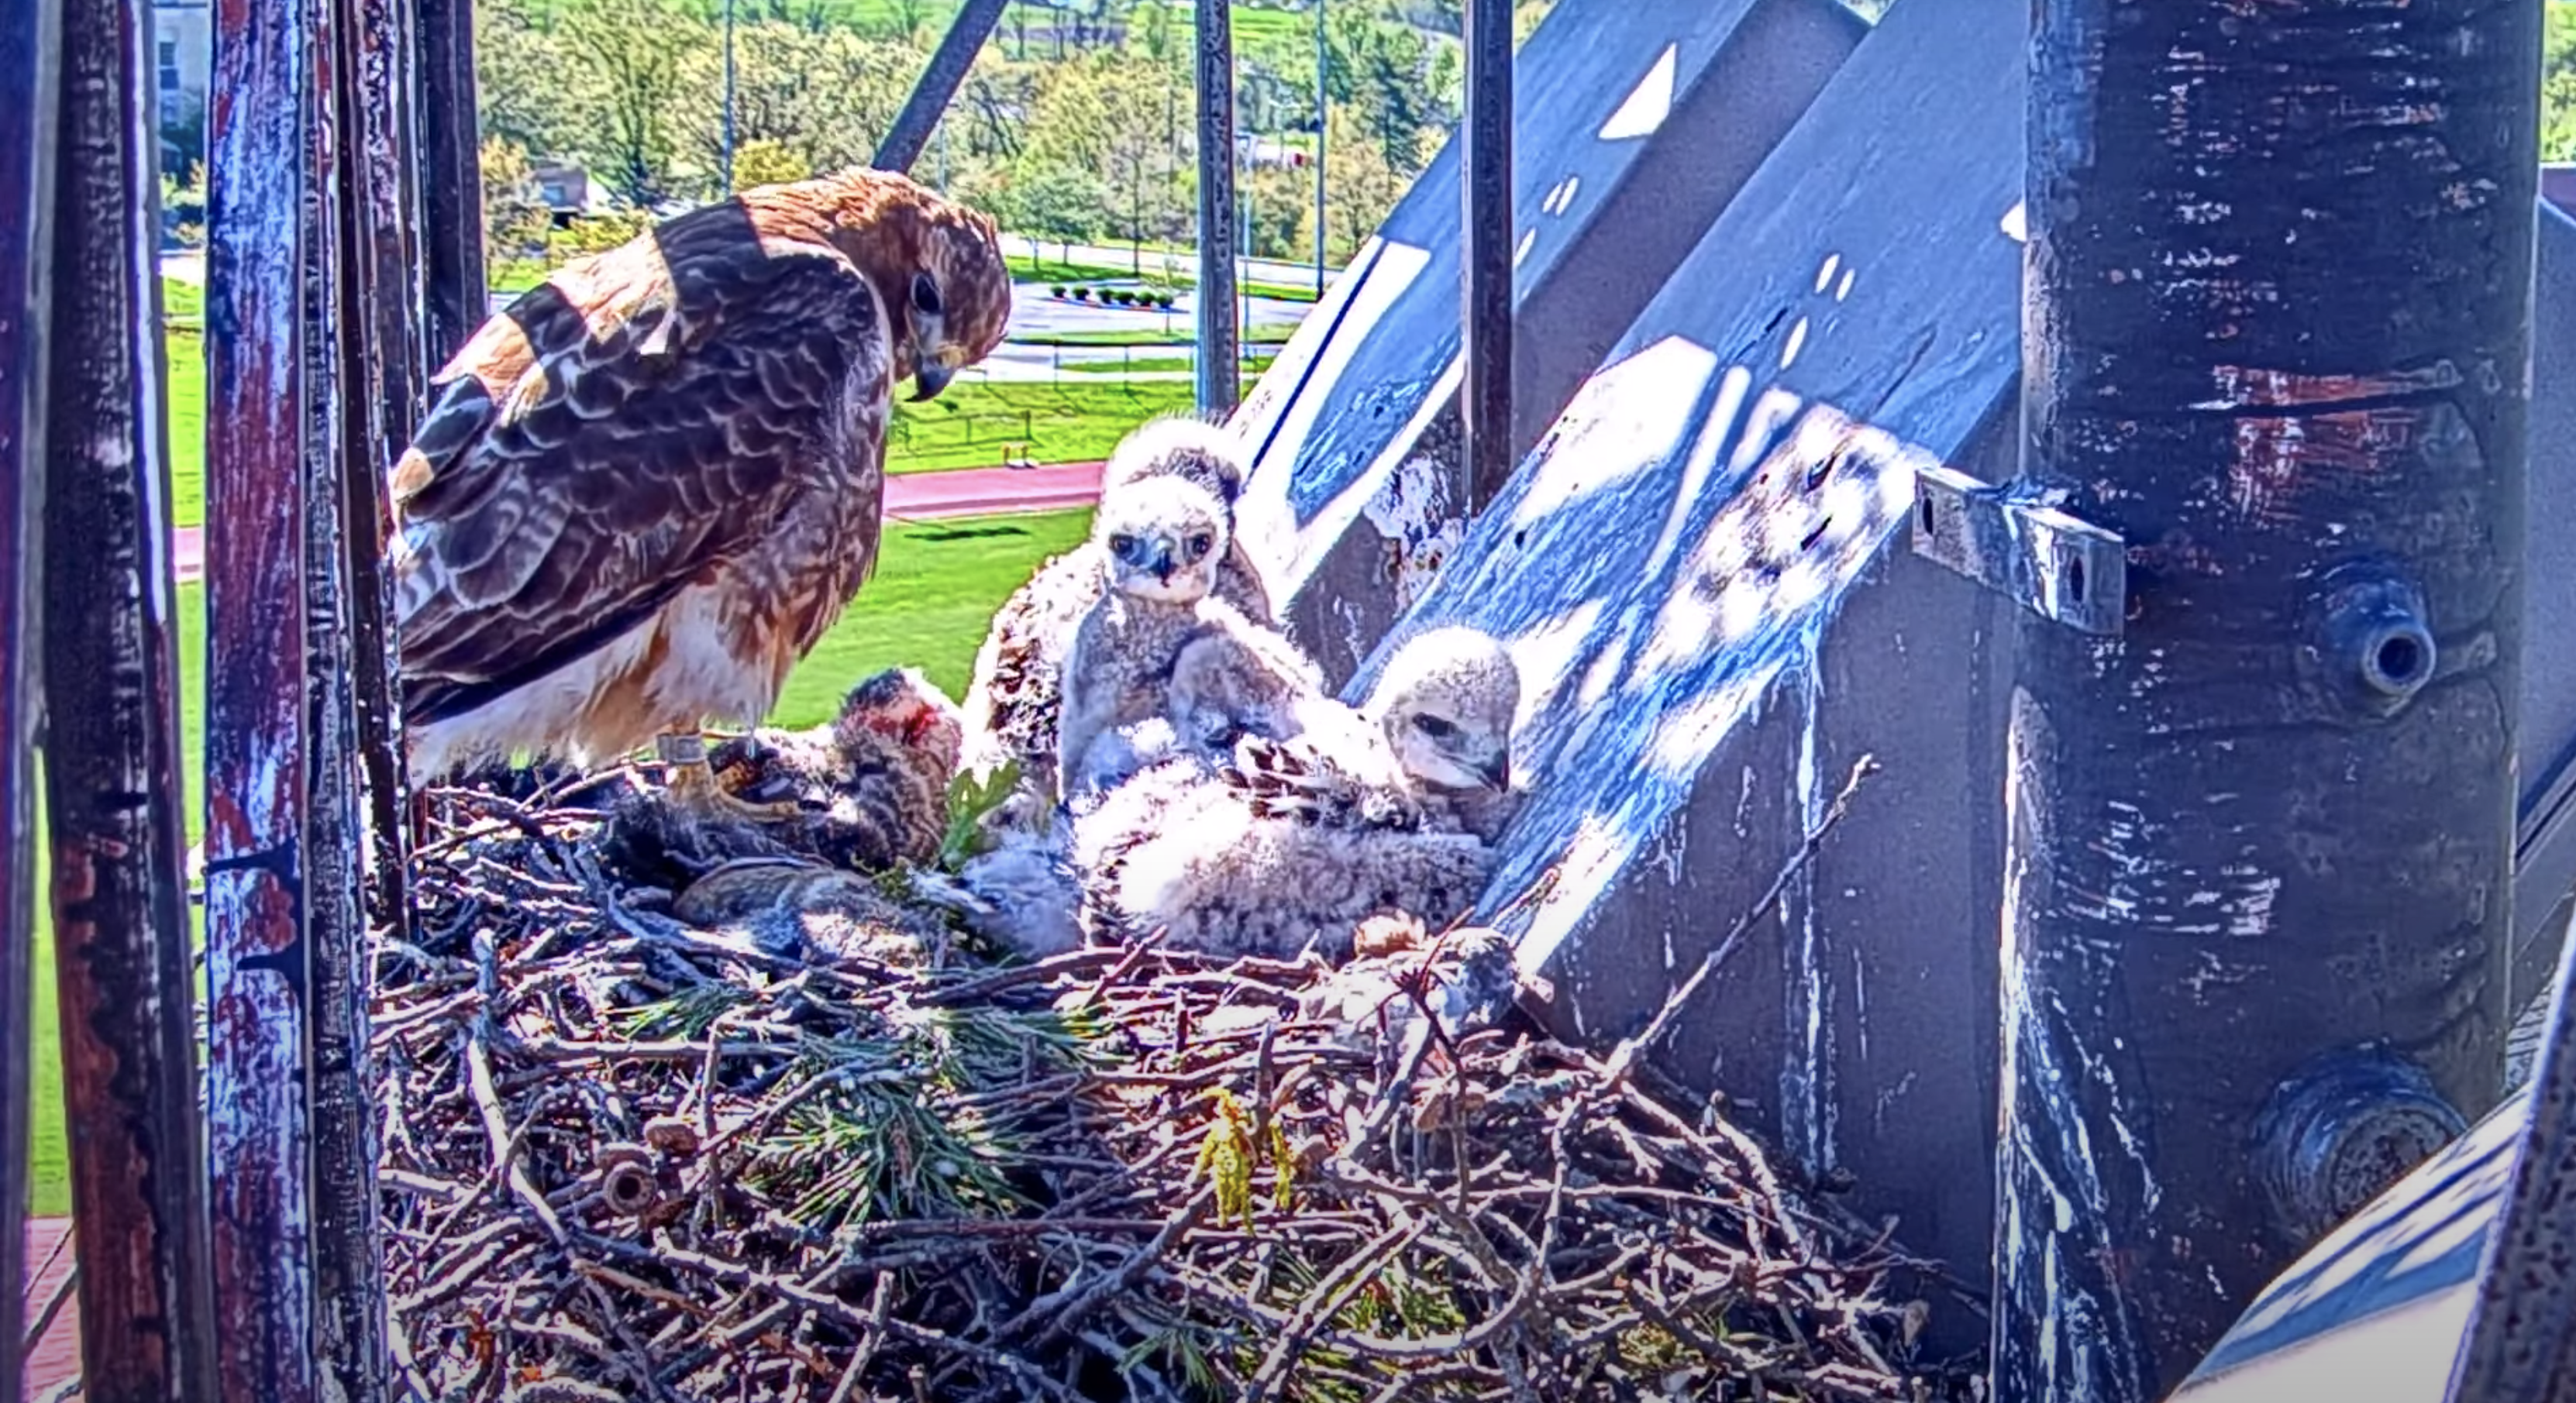 A screenshot of Big Red looking down and standing next to the three nestlings in the nest. One of the nestlings is looking right at the camera.